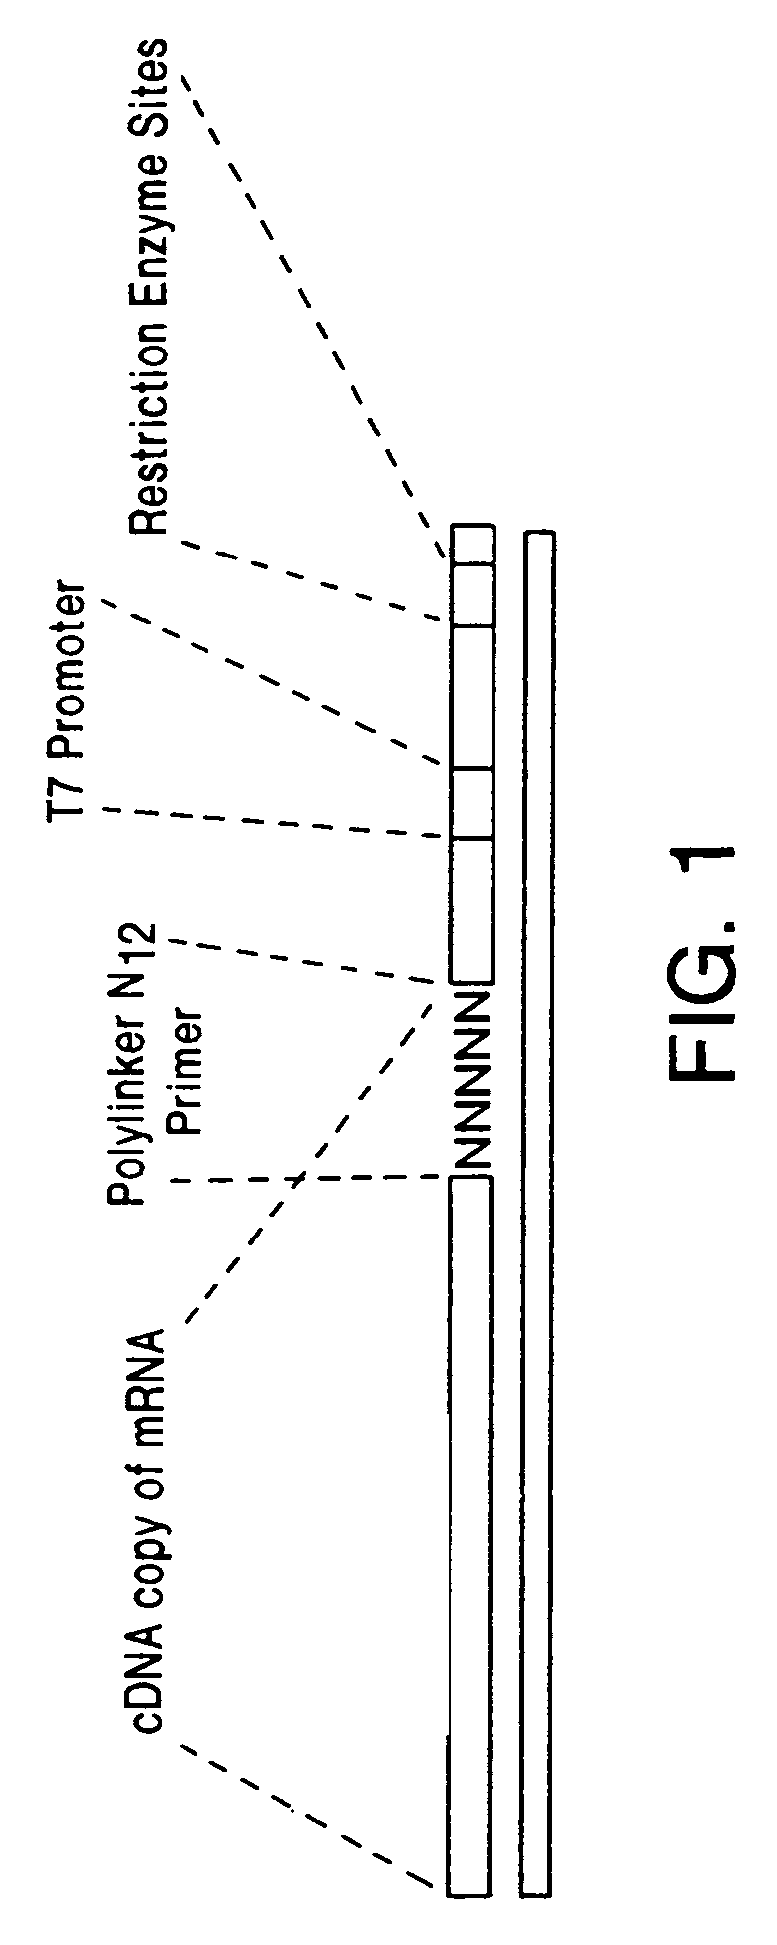 Methods and kits for identifying and quantifying RNAs and DNAs associated with RNA and DNA binding proteins